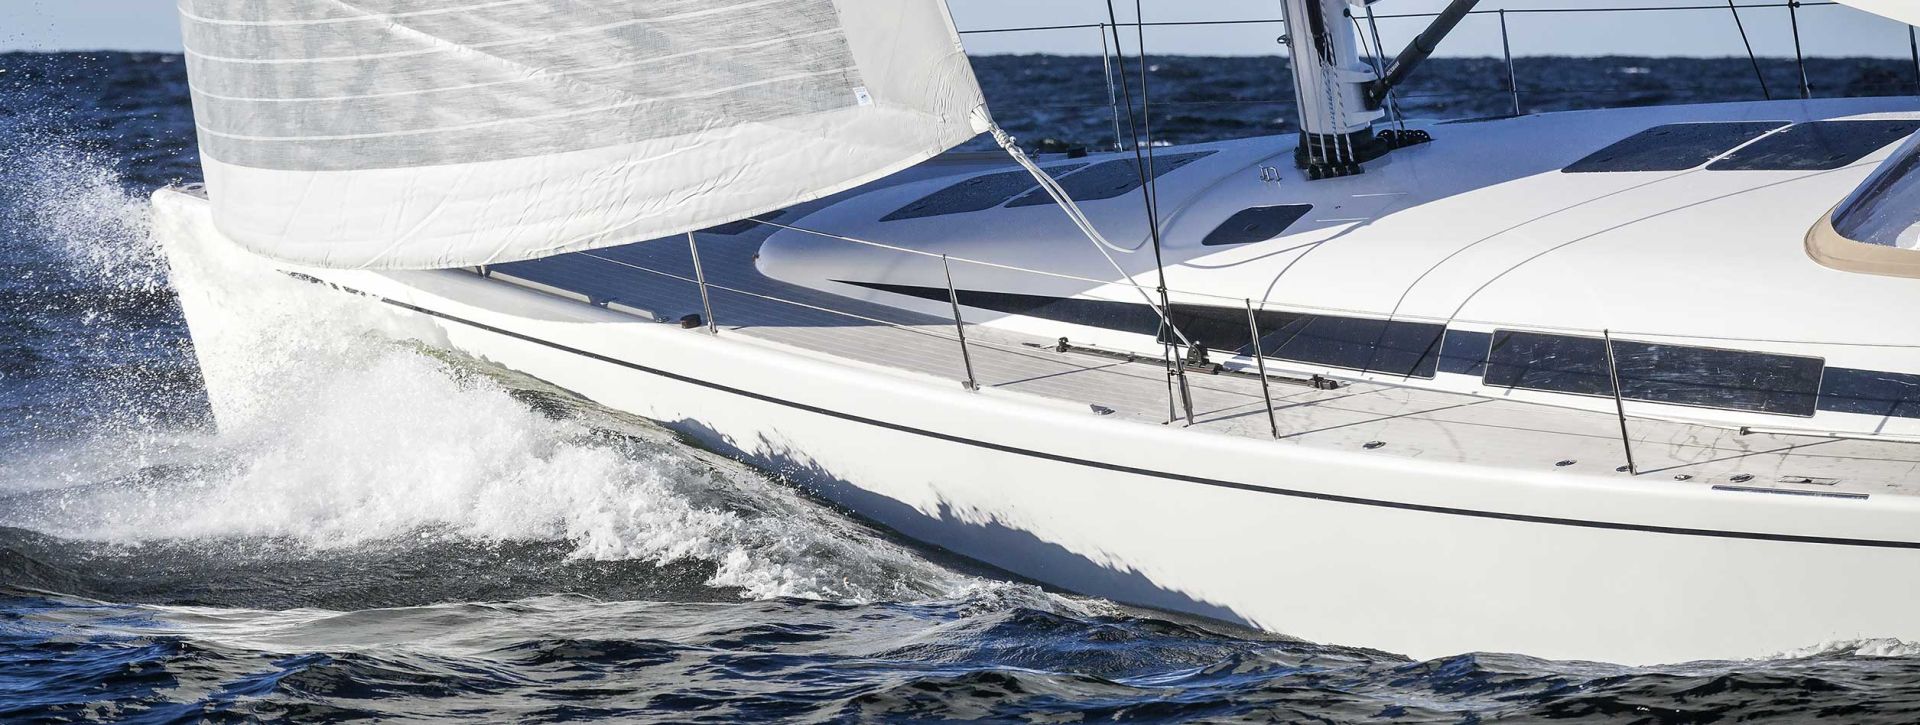 Sailboat with Composite Gray Deck Photo